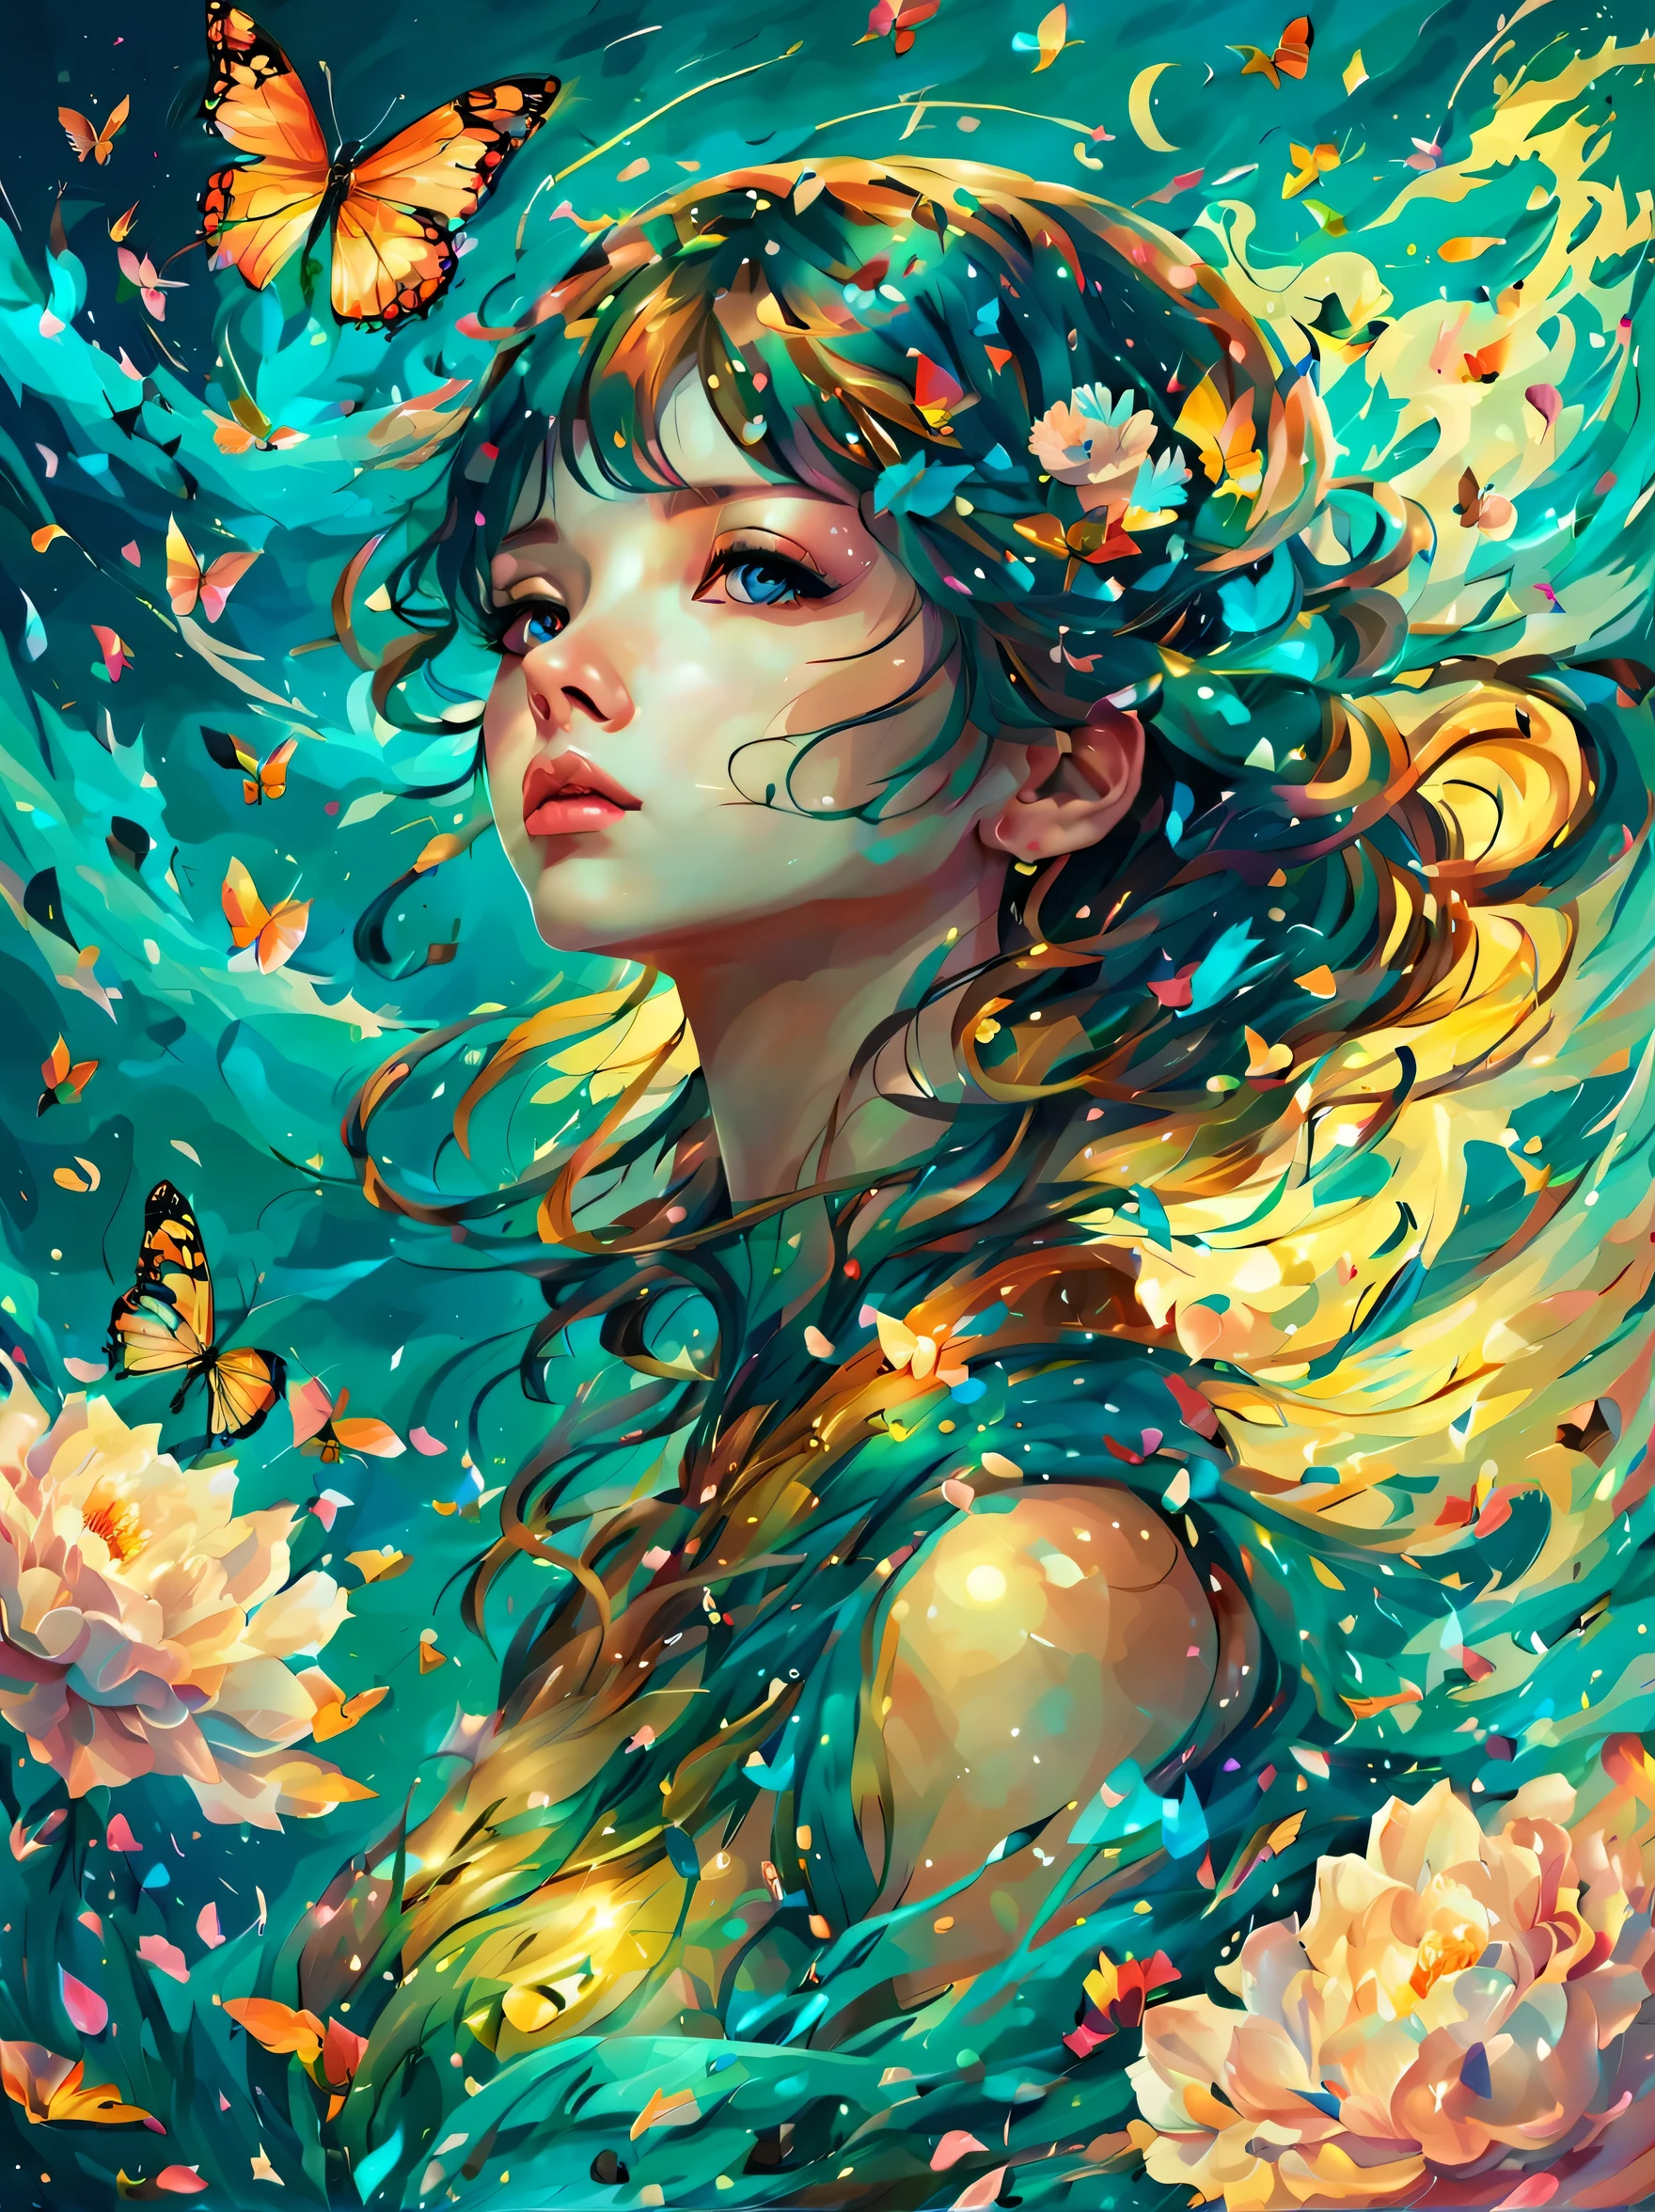 (masterpiece, highest quality:1.2),Windの精霊,girl:17 years old:perfect face,dance,butterfly々,flower,Wind,effect,become familiar with,magic effect,light,すごくlight, artistic, artist, color art, Use of magic,fancy,fantasy,beautiful,最高masterpiece,masterpiece,Sparkling,rich colors,colorful,colorfulな呪文を唱える,become familiar with,beautiful光と影,Sounds like fun, Isn&#39;t that so??,anatomically correct,Windのeffect,dream-like,fantasy,Mysterious,Lakeside